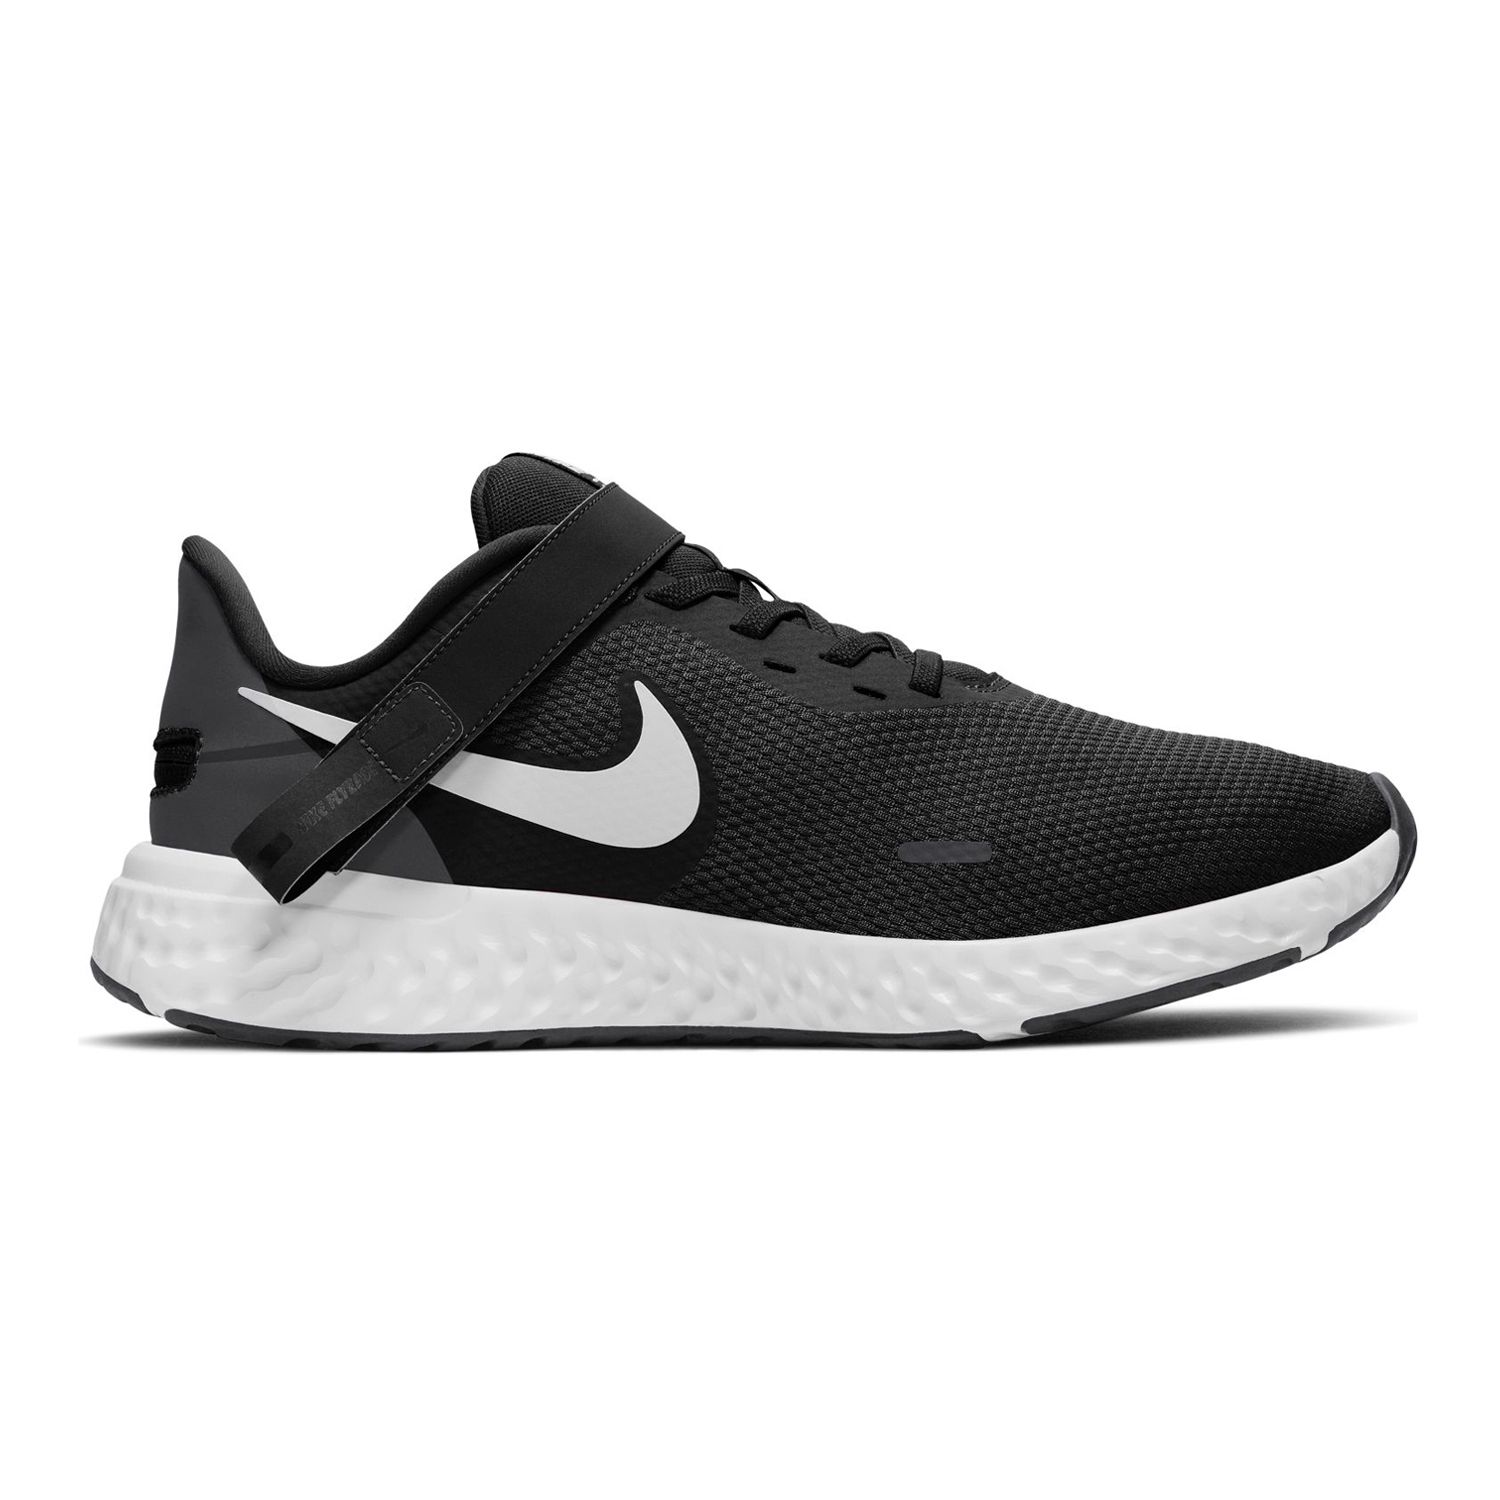 nike shoes under 30 pounds